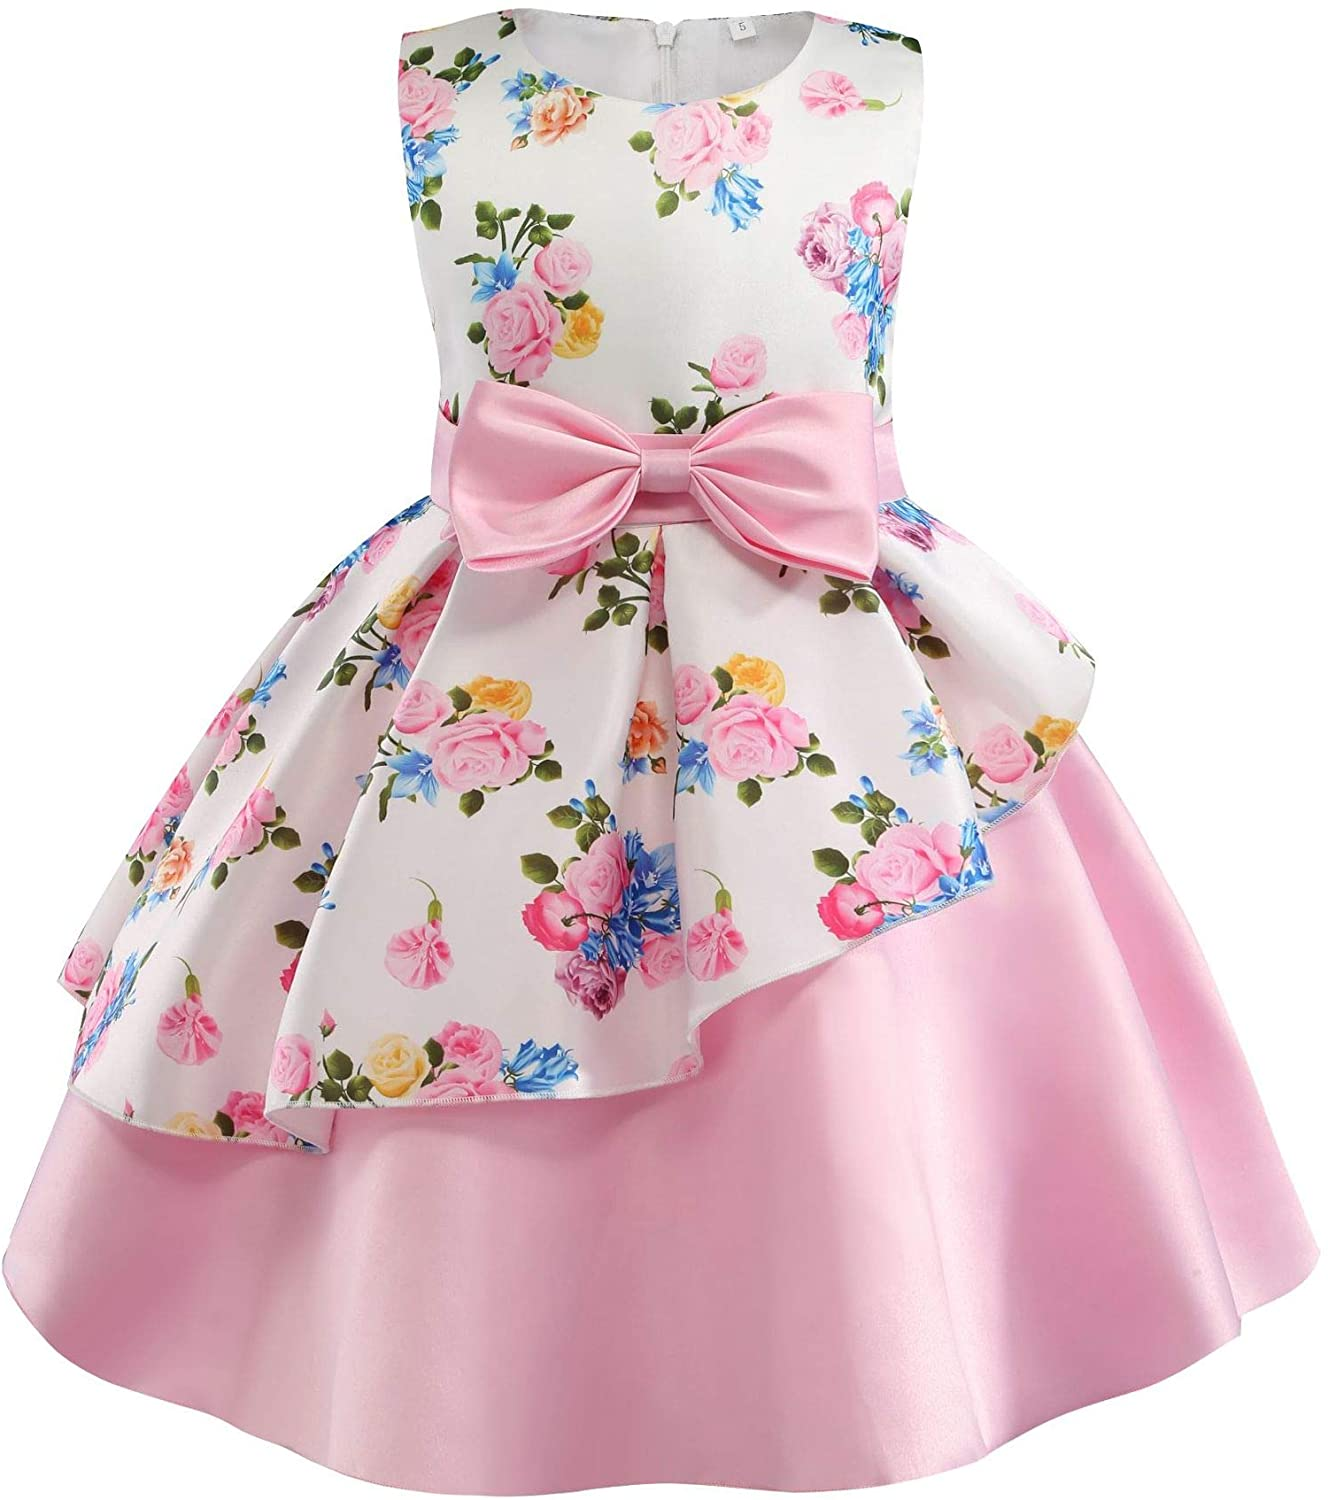  "Fancy Flower Dresses for Girls: Perfect for Special Occasions and Parties"